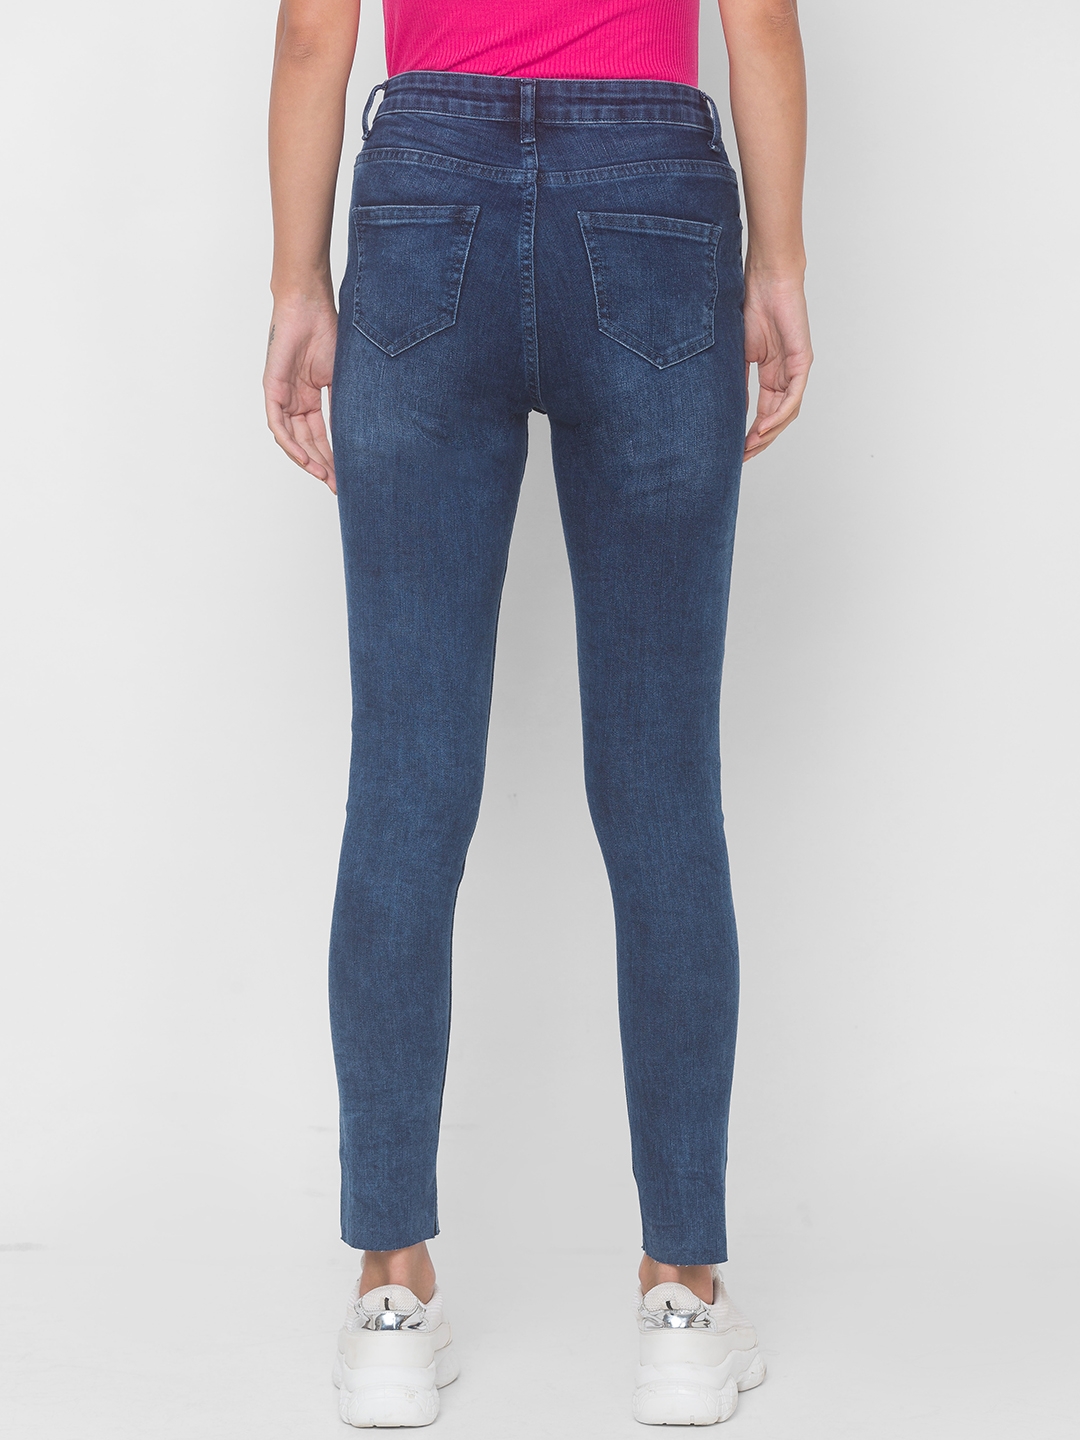 globus | Women's Blue Cotton Solid Ripped Jeans 2